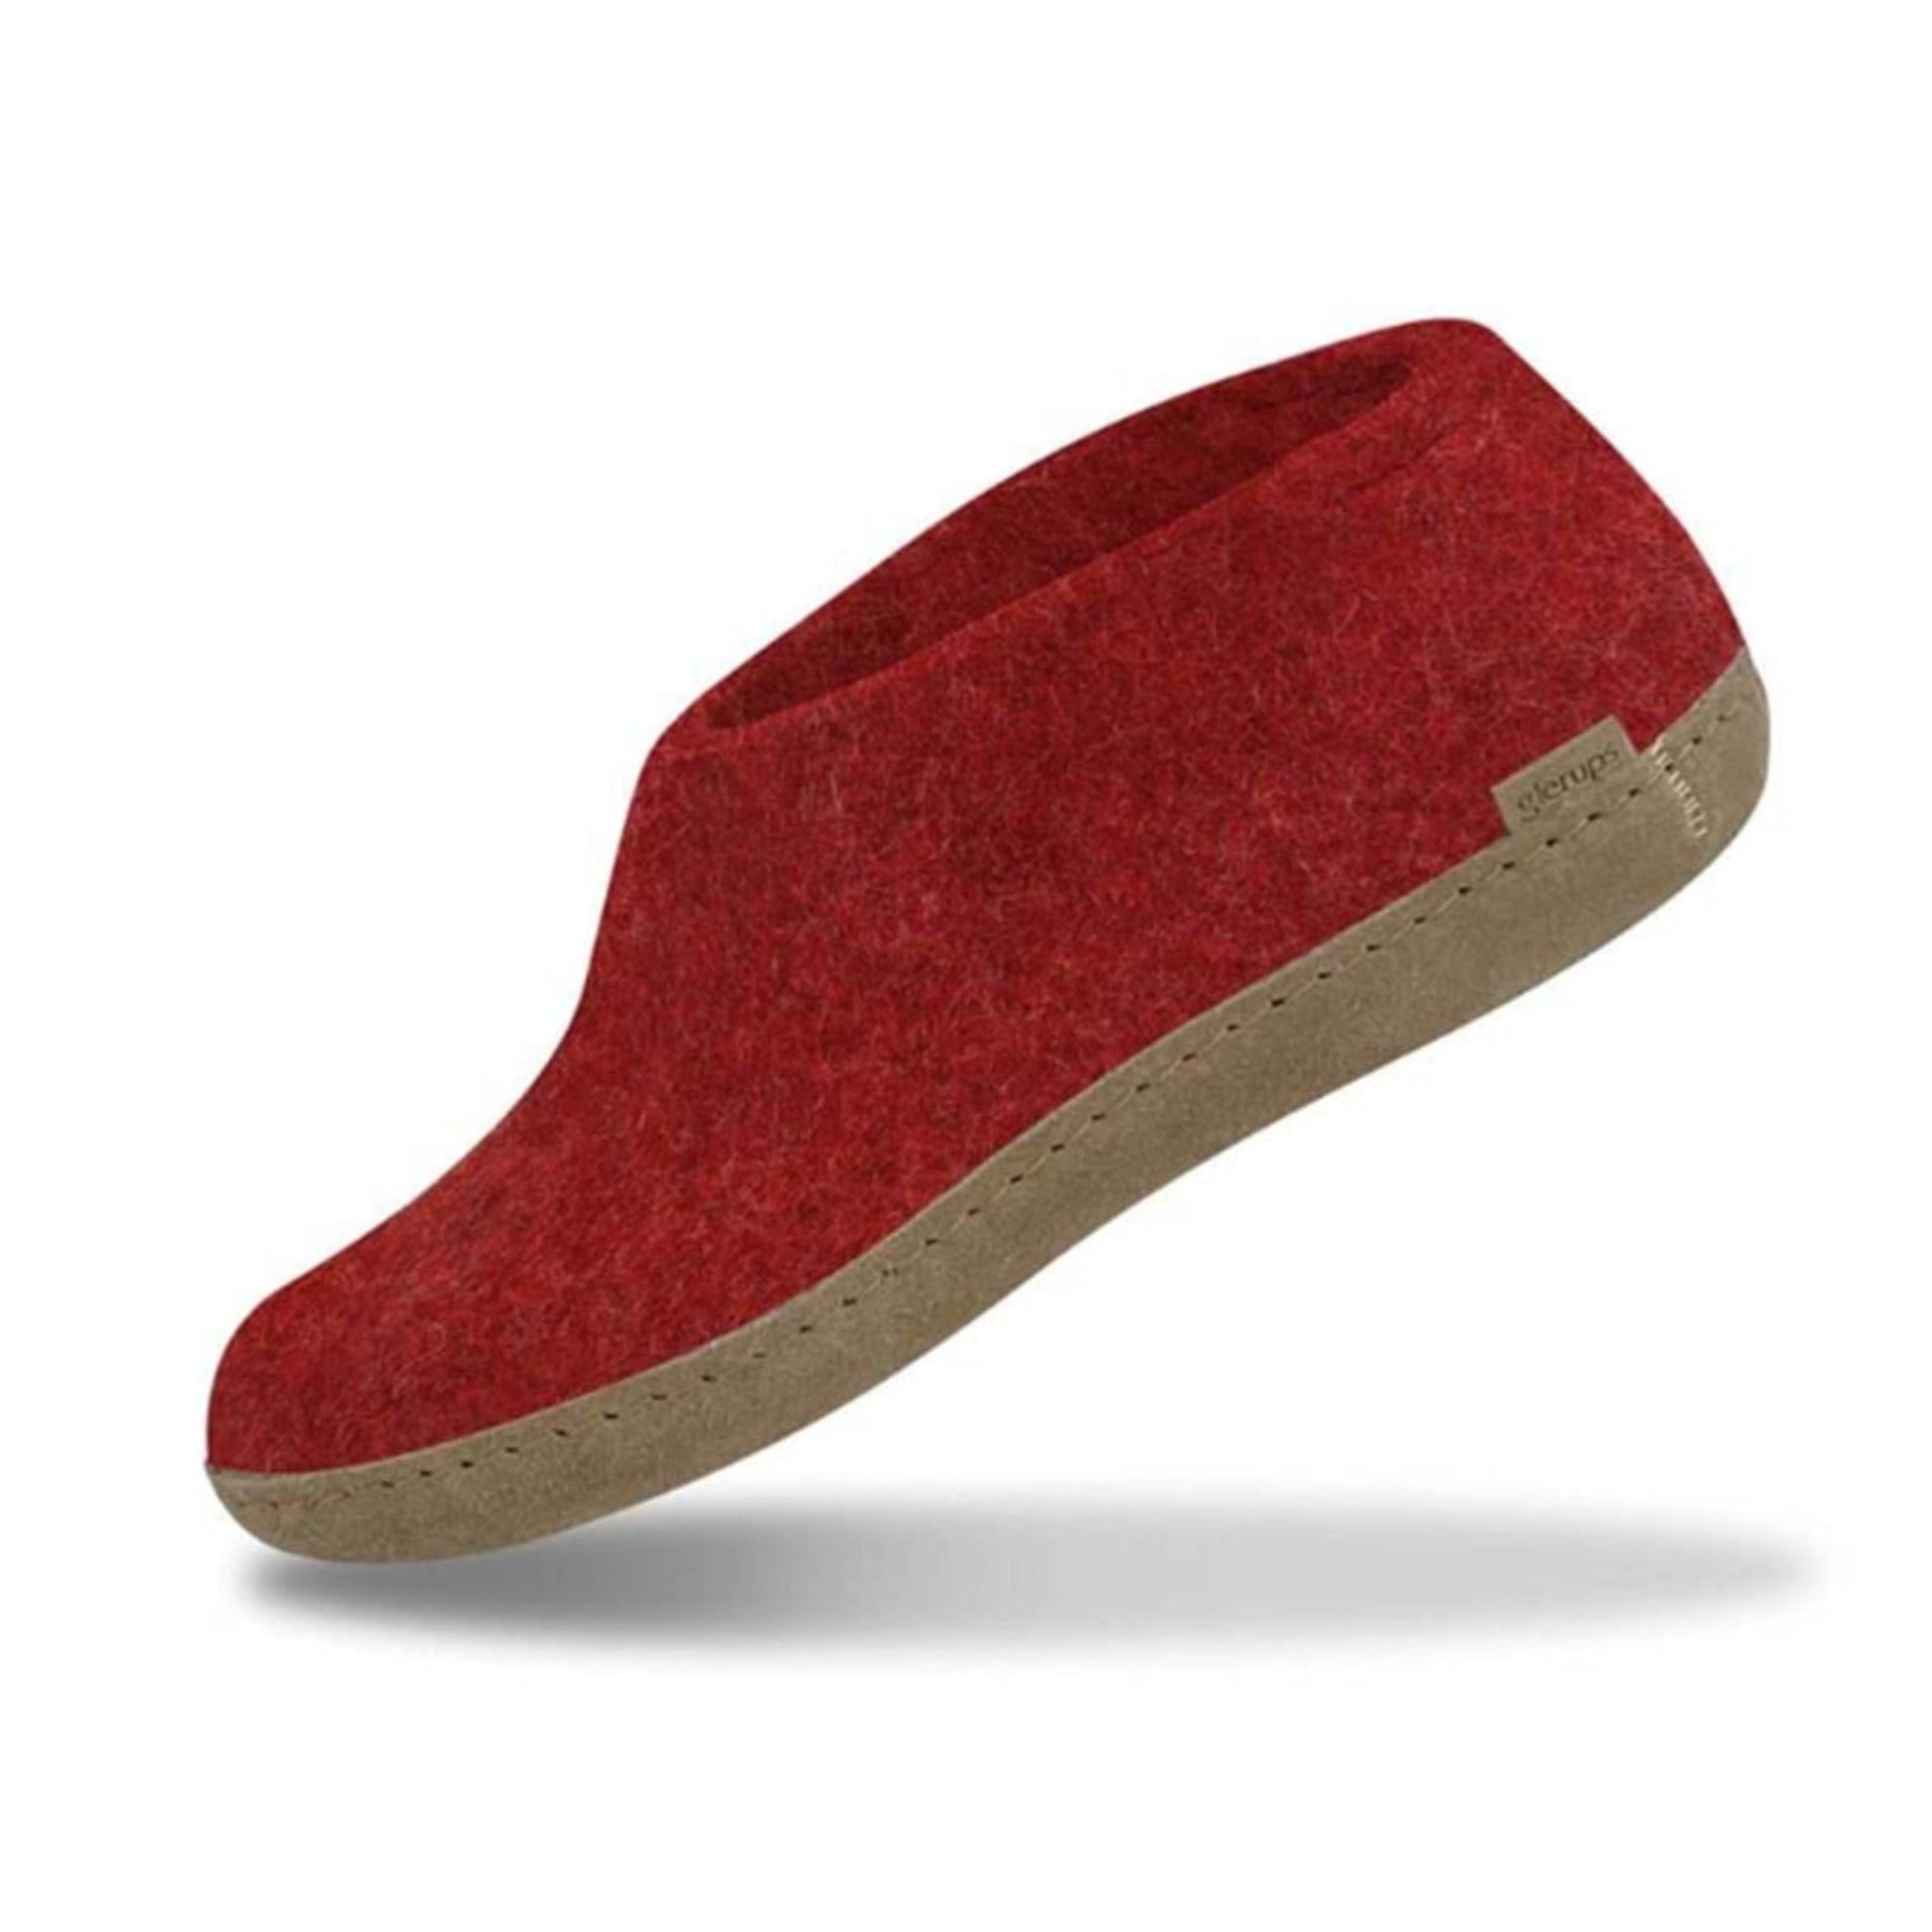 GLERUPS The Shoe Red - Leather Sole (6816095076417)